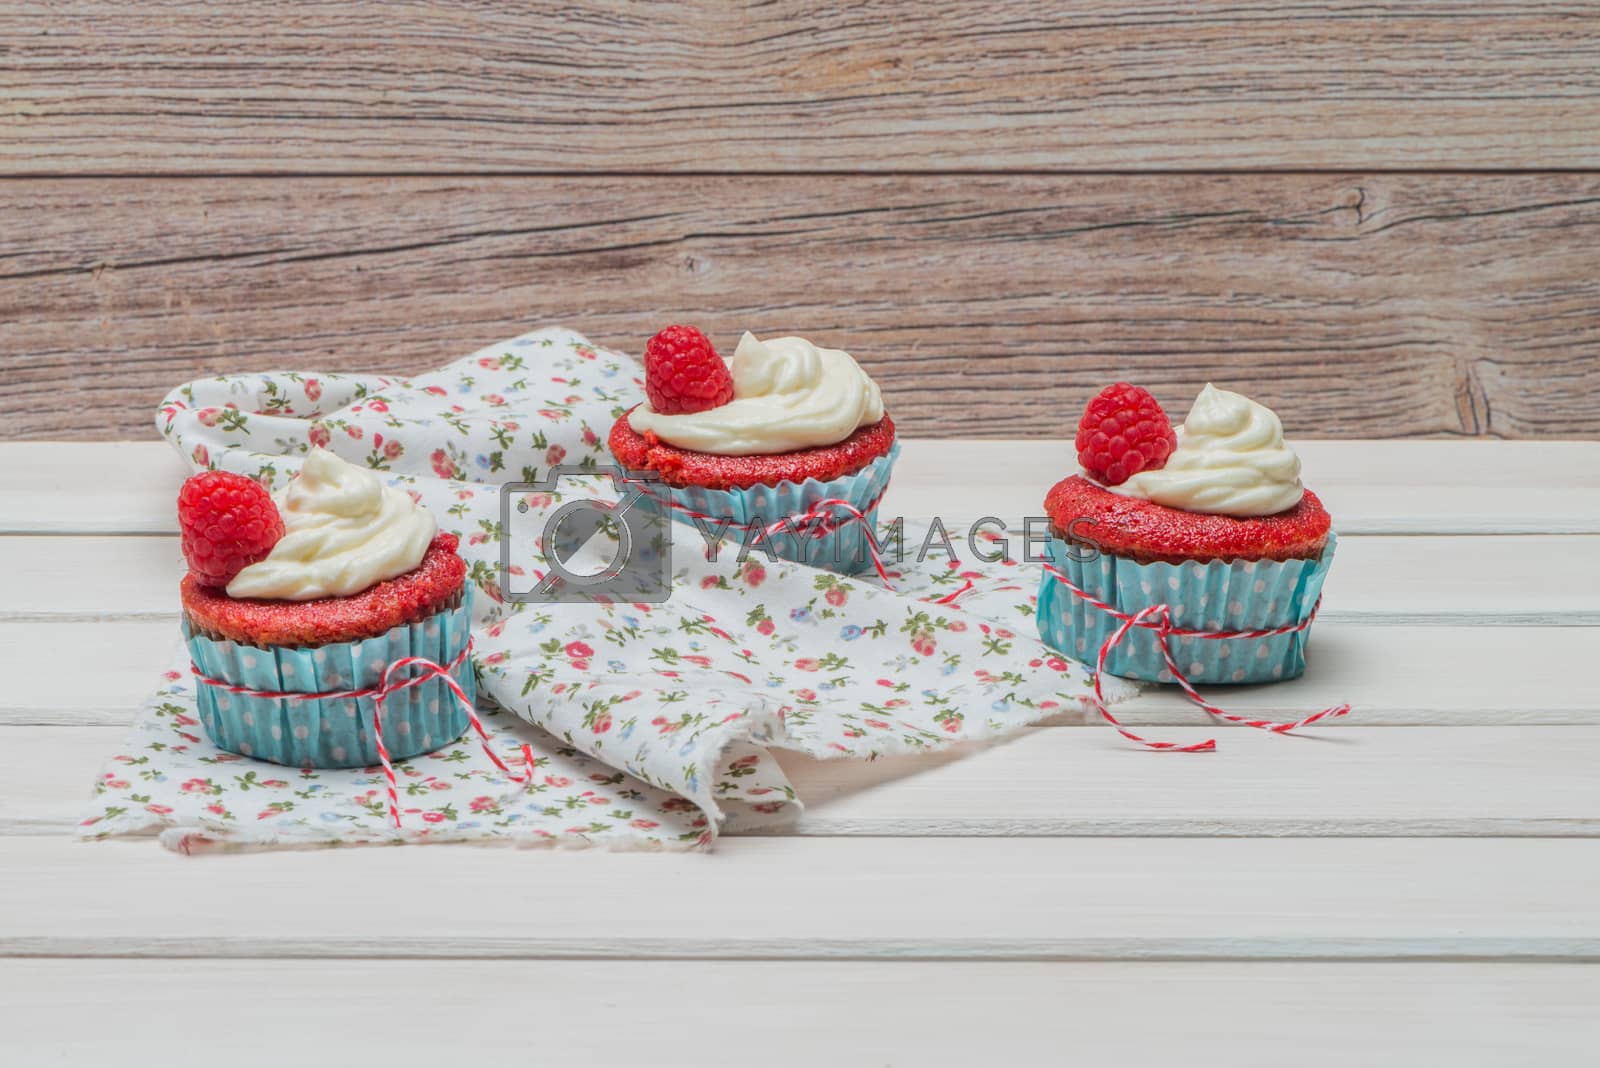 Royalty free image of Red cupcakes with cream cheese frosting by homydesign